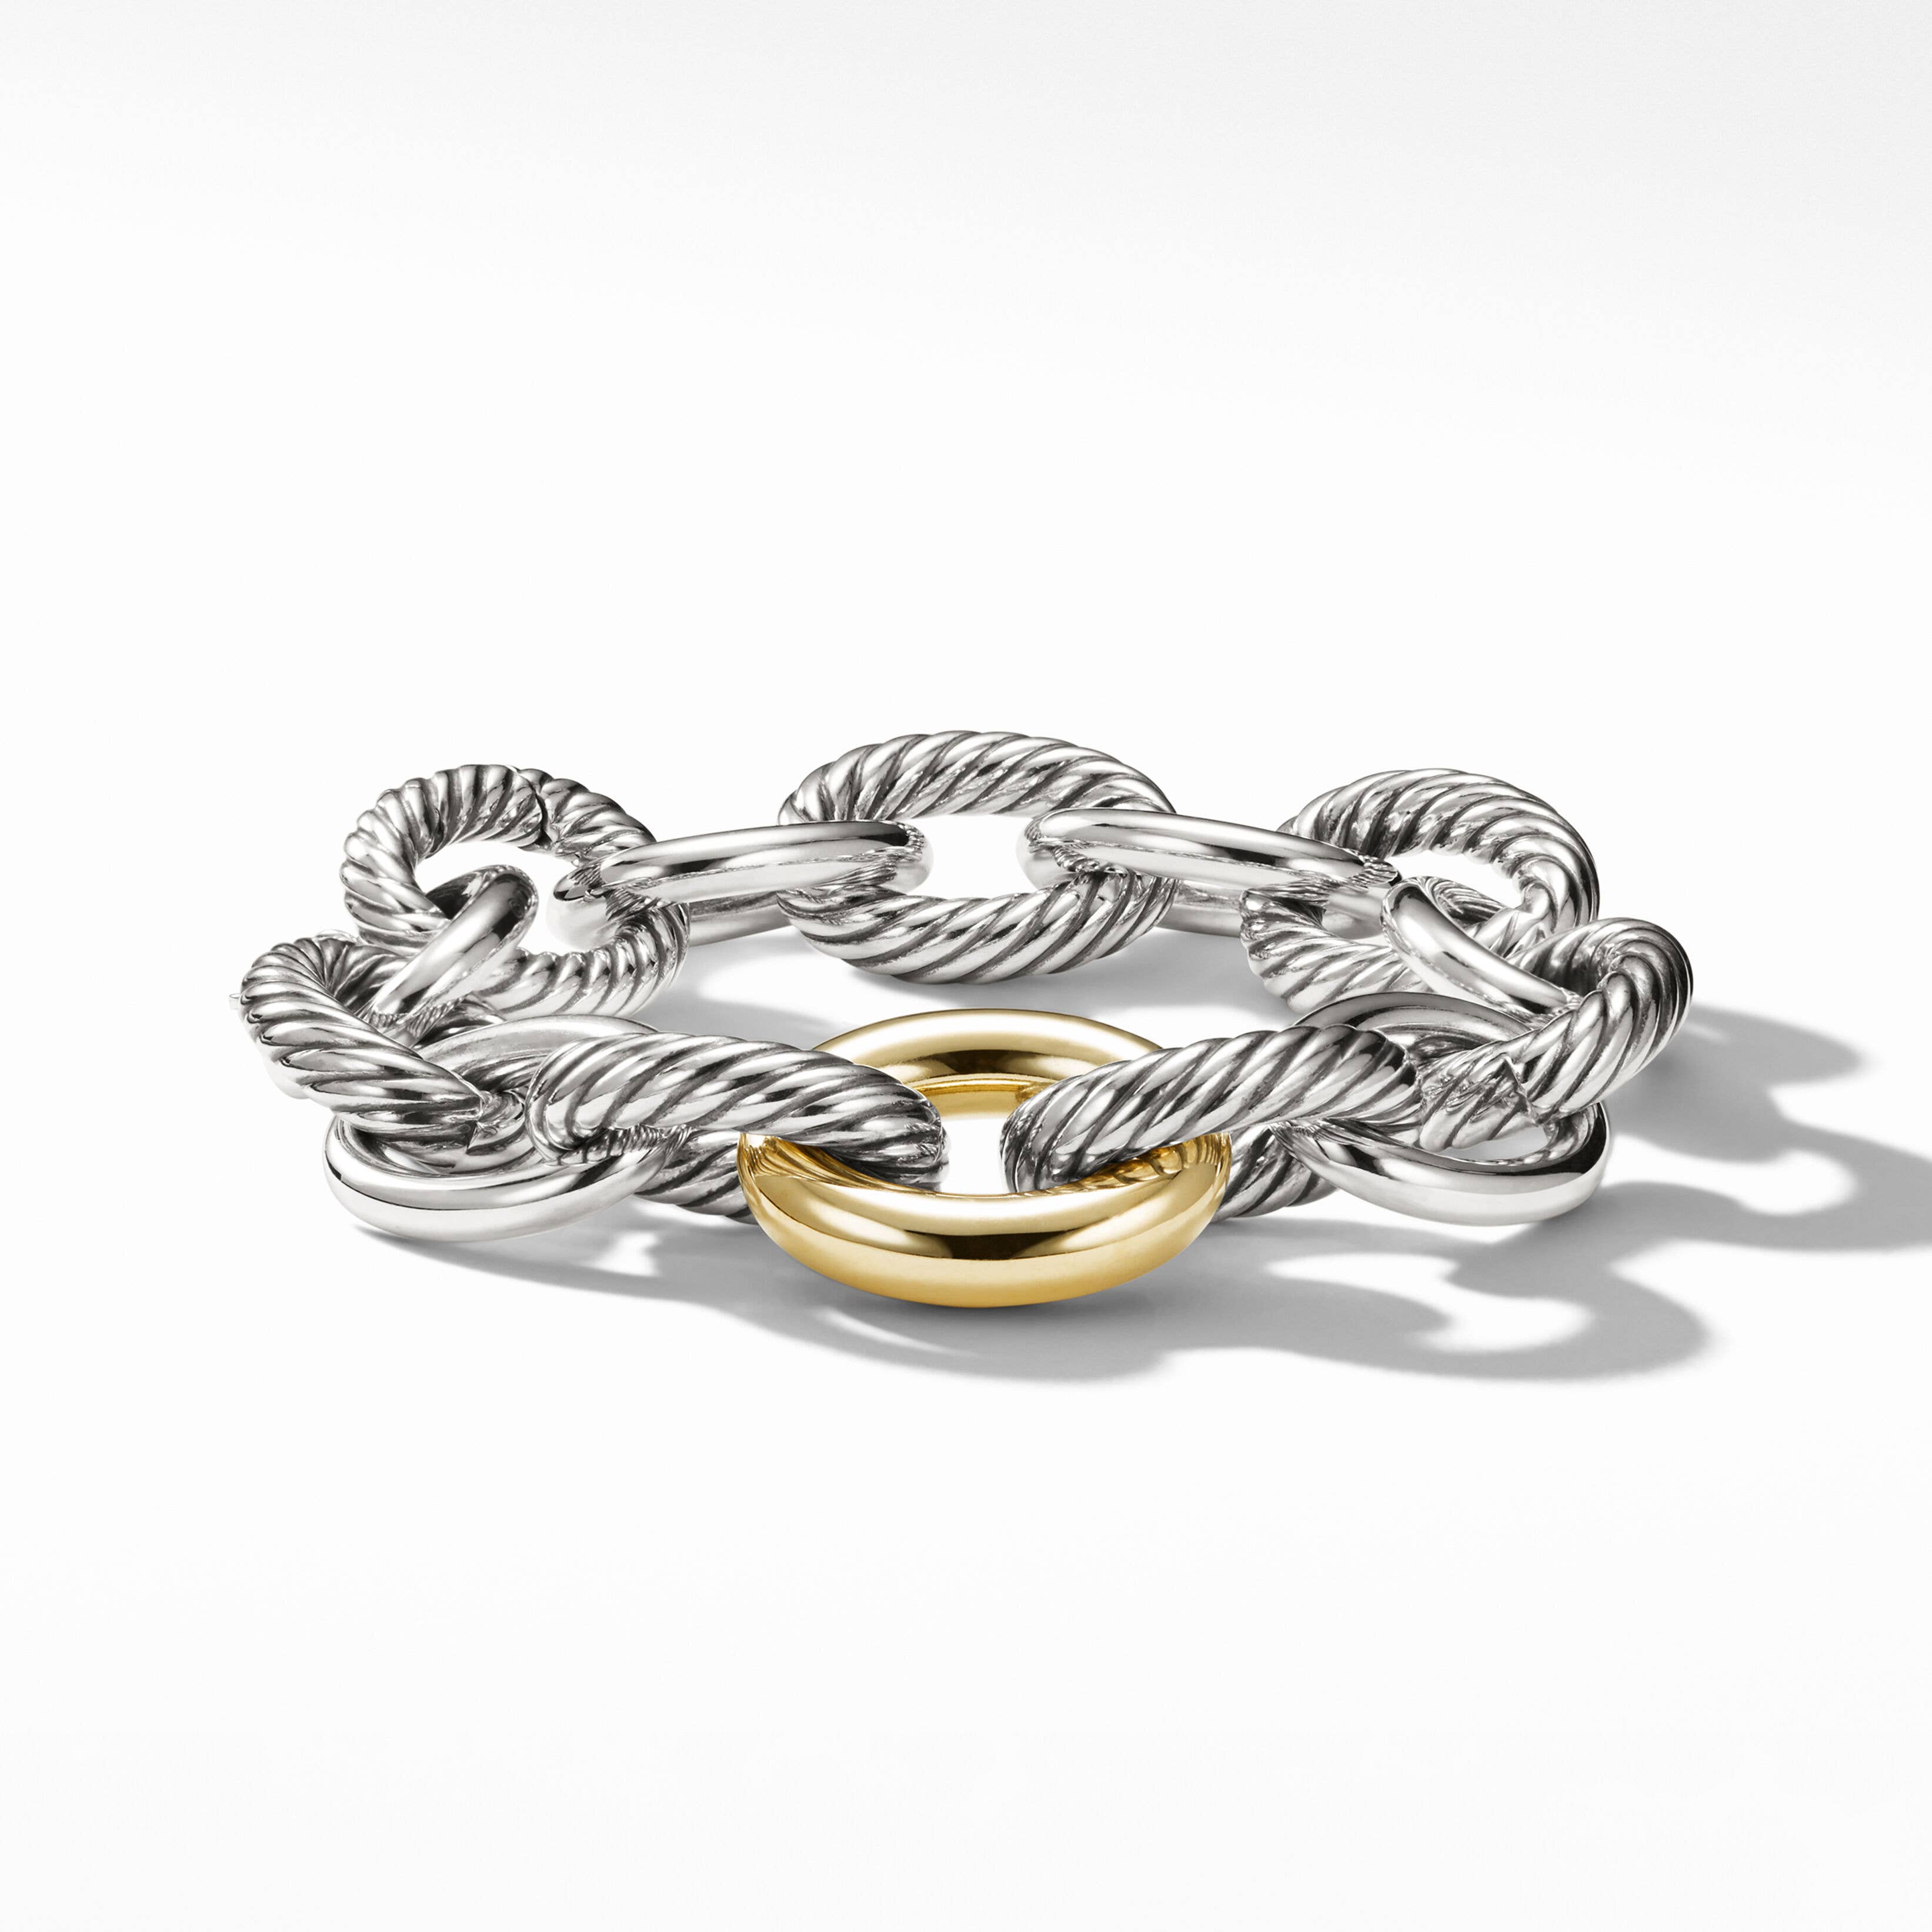 Oval Link Chain Bracelet with 18K Yellow Gold